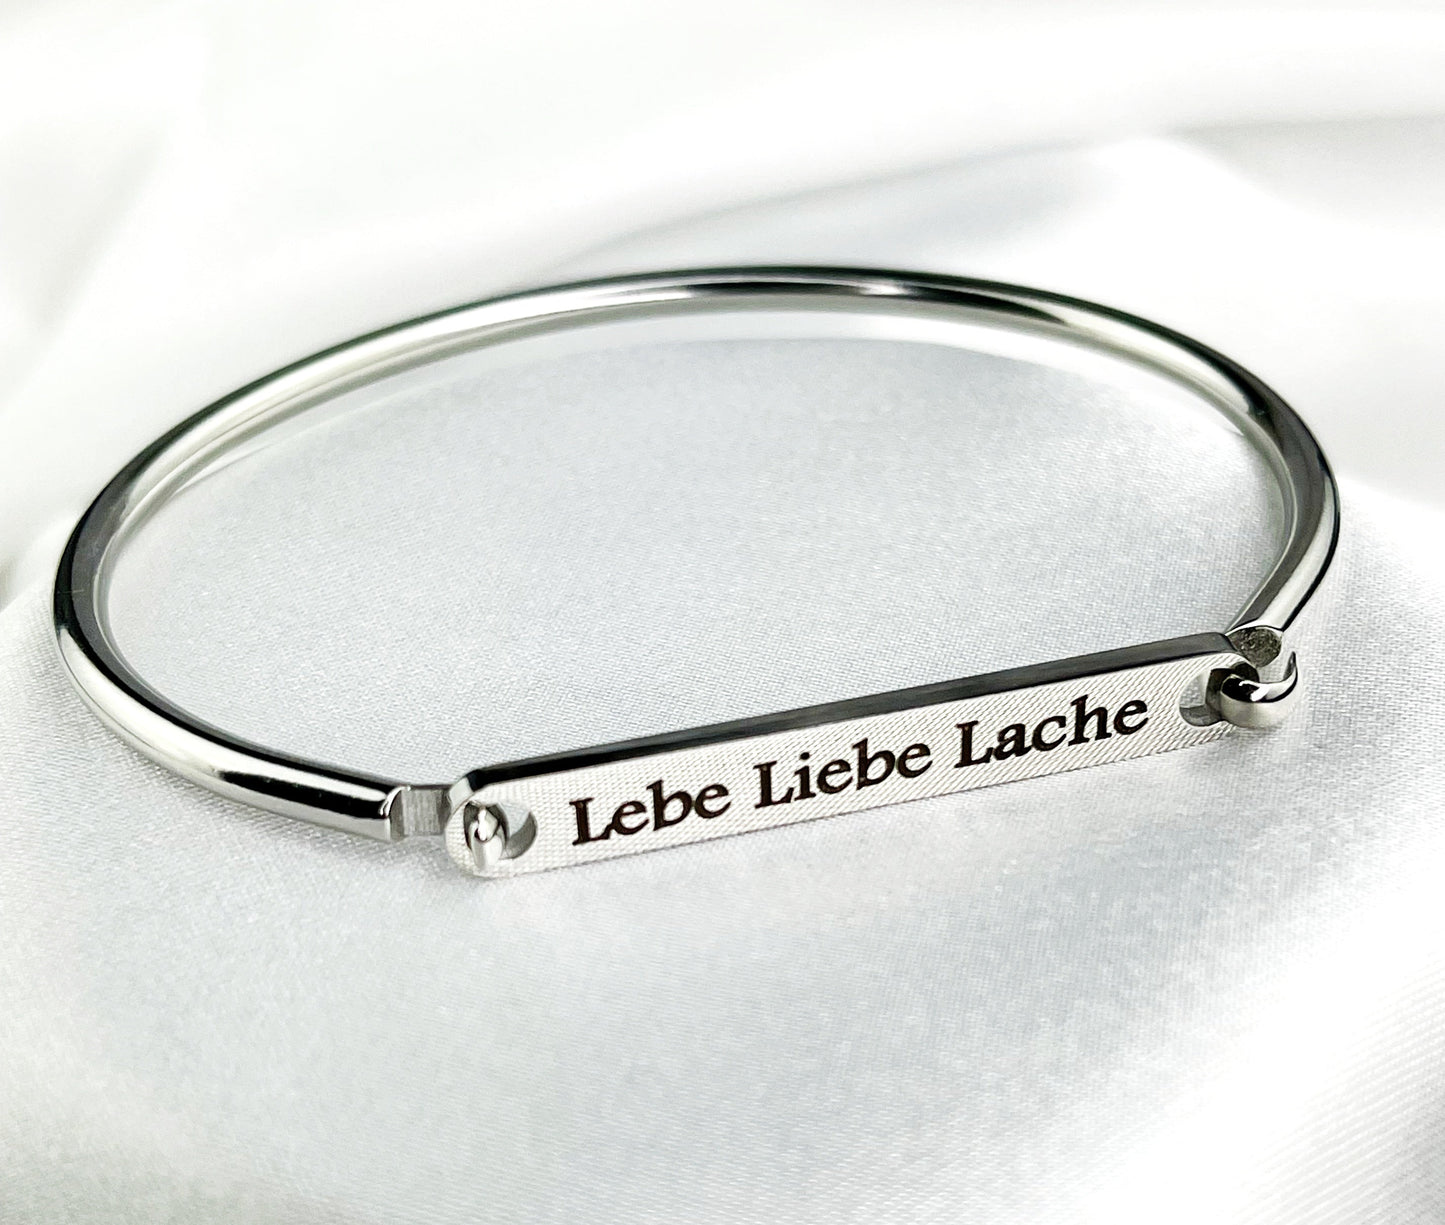 Personal Bangle made of stainless steel - engraving - color silver